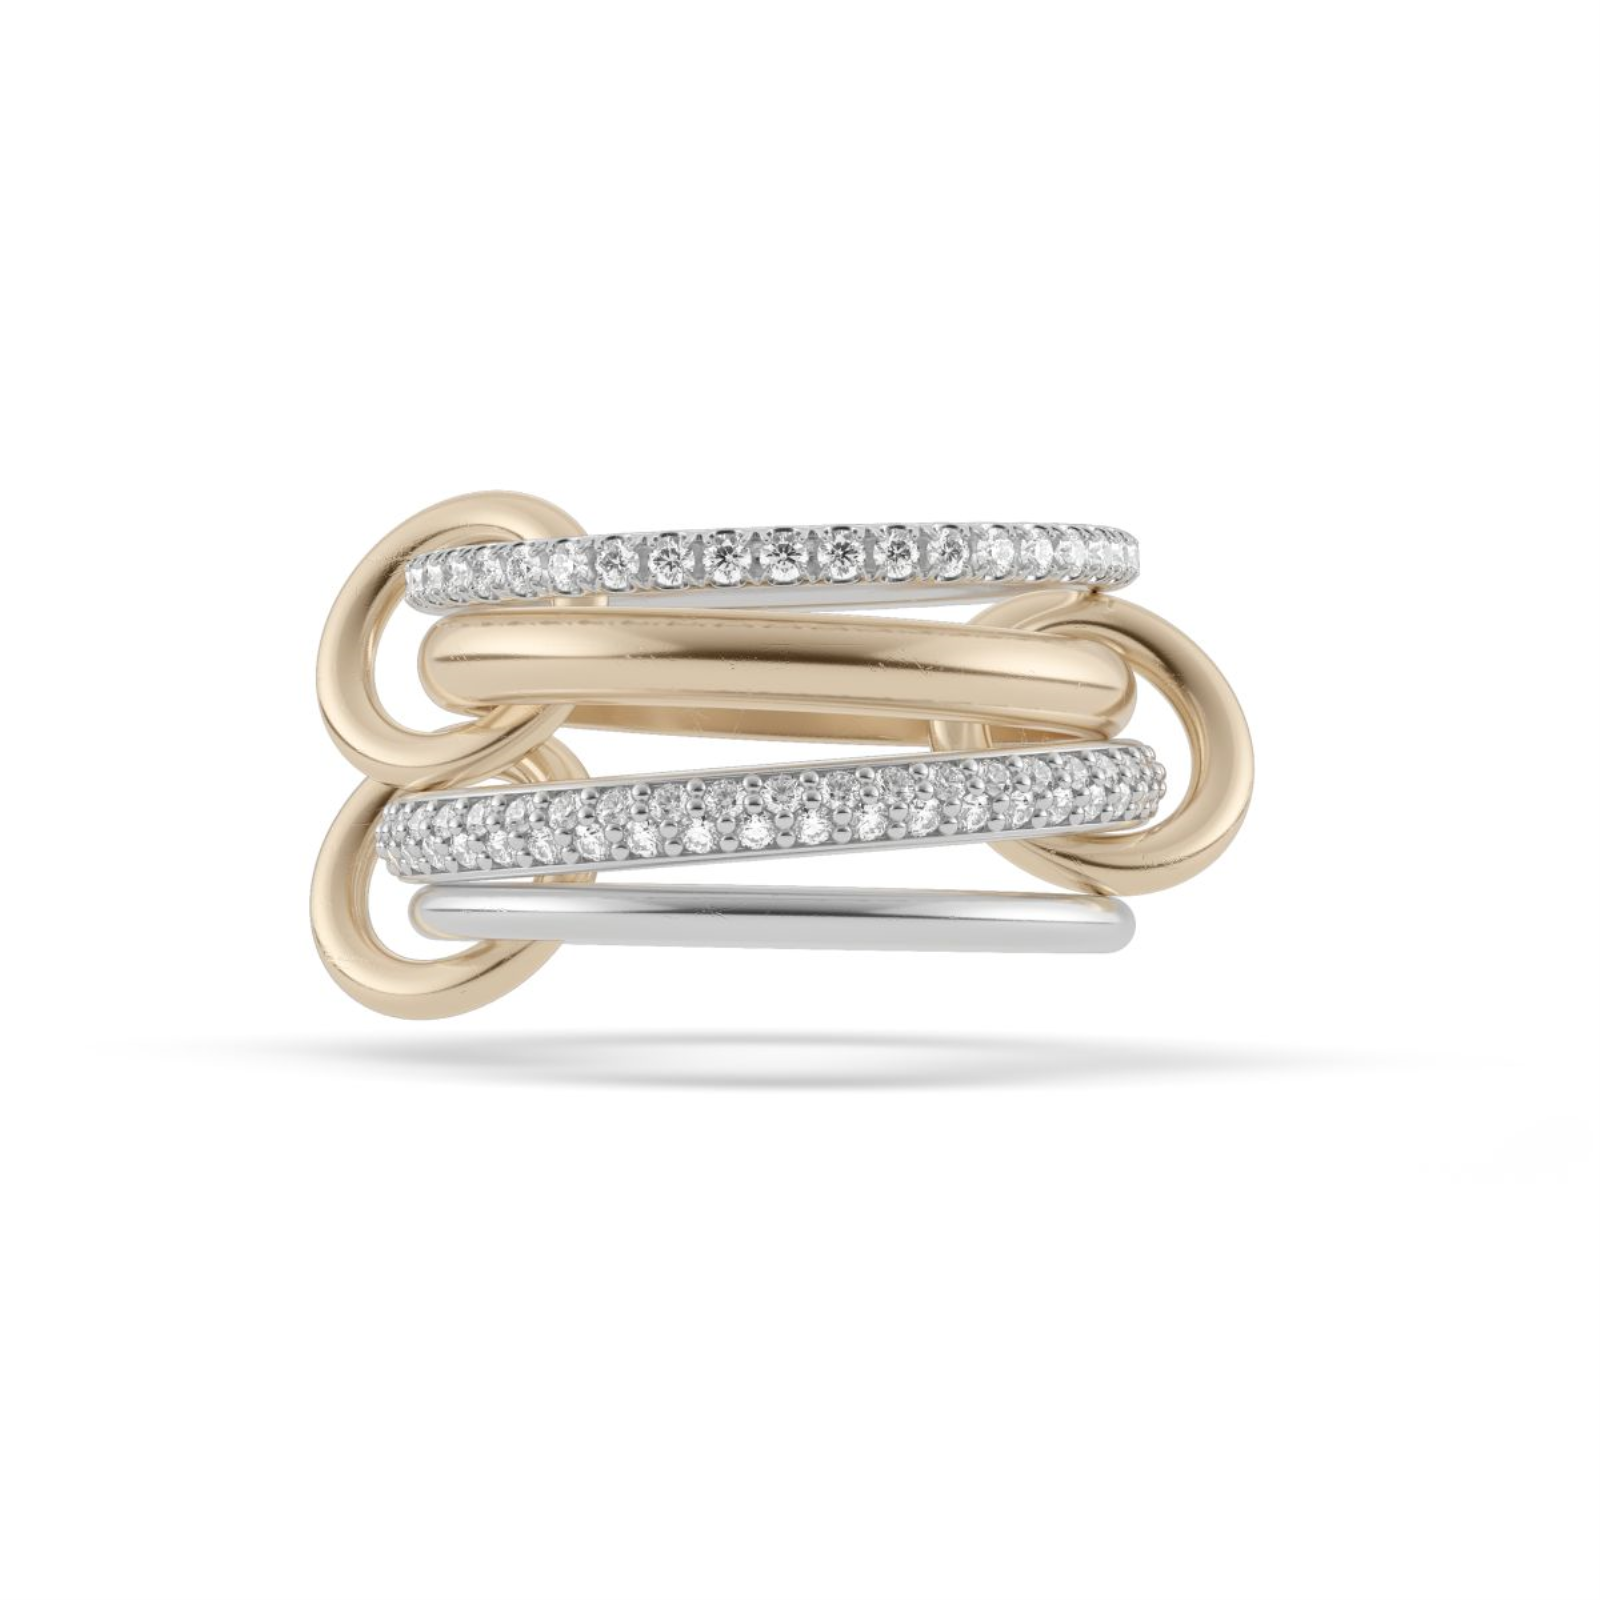 GOLD AND STERLING SILVER VEGA BLANC PETIT 4-LINK RING